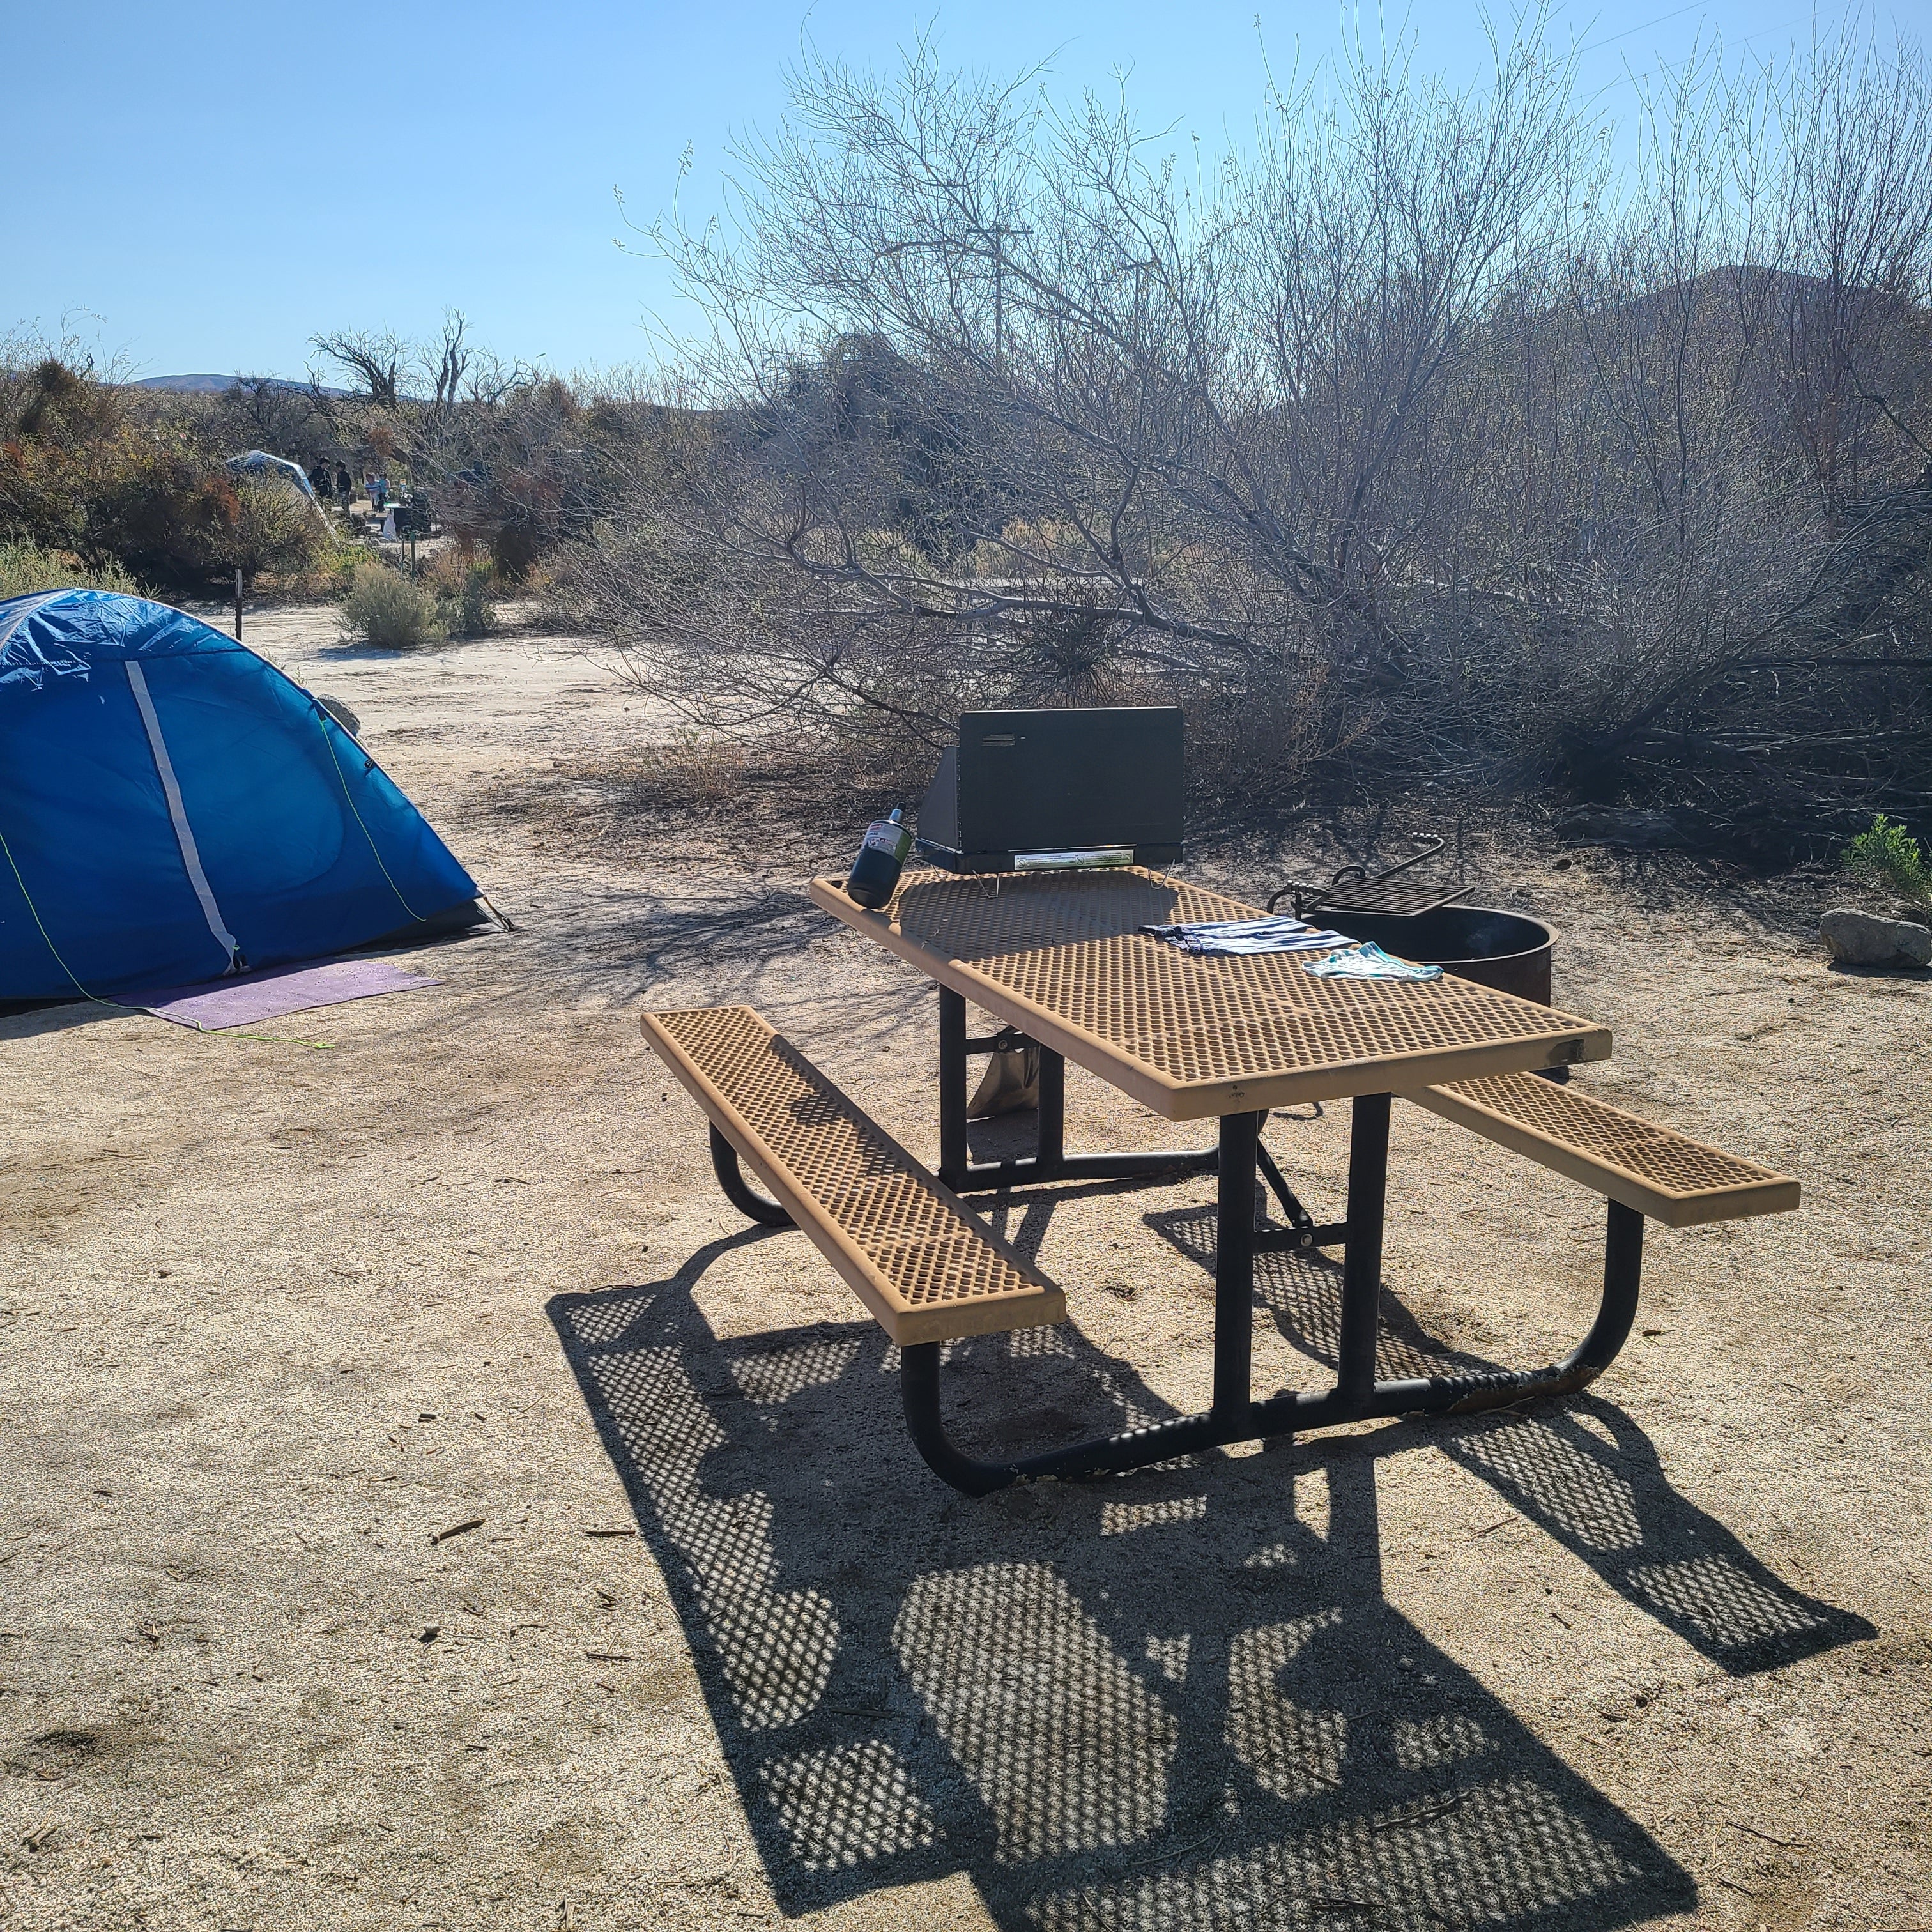 Camper submitted image from San Diego County Vallecito Regional Park - 1